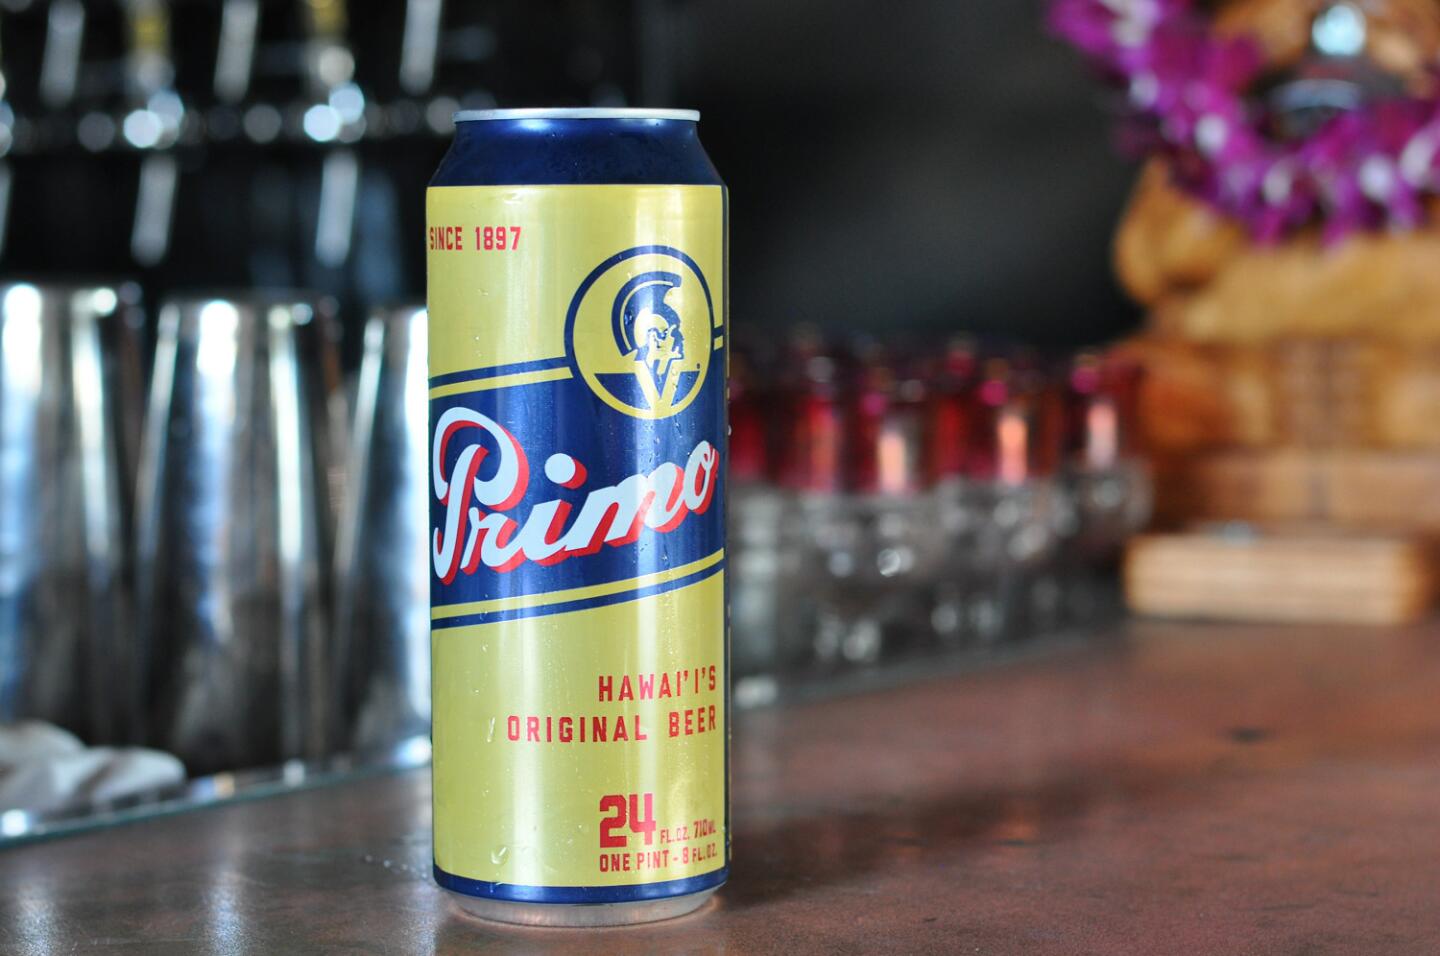 A 24-ounce can of Primo beer is offered at the bar at A-Frame.